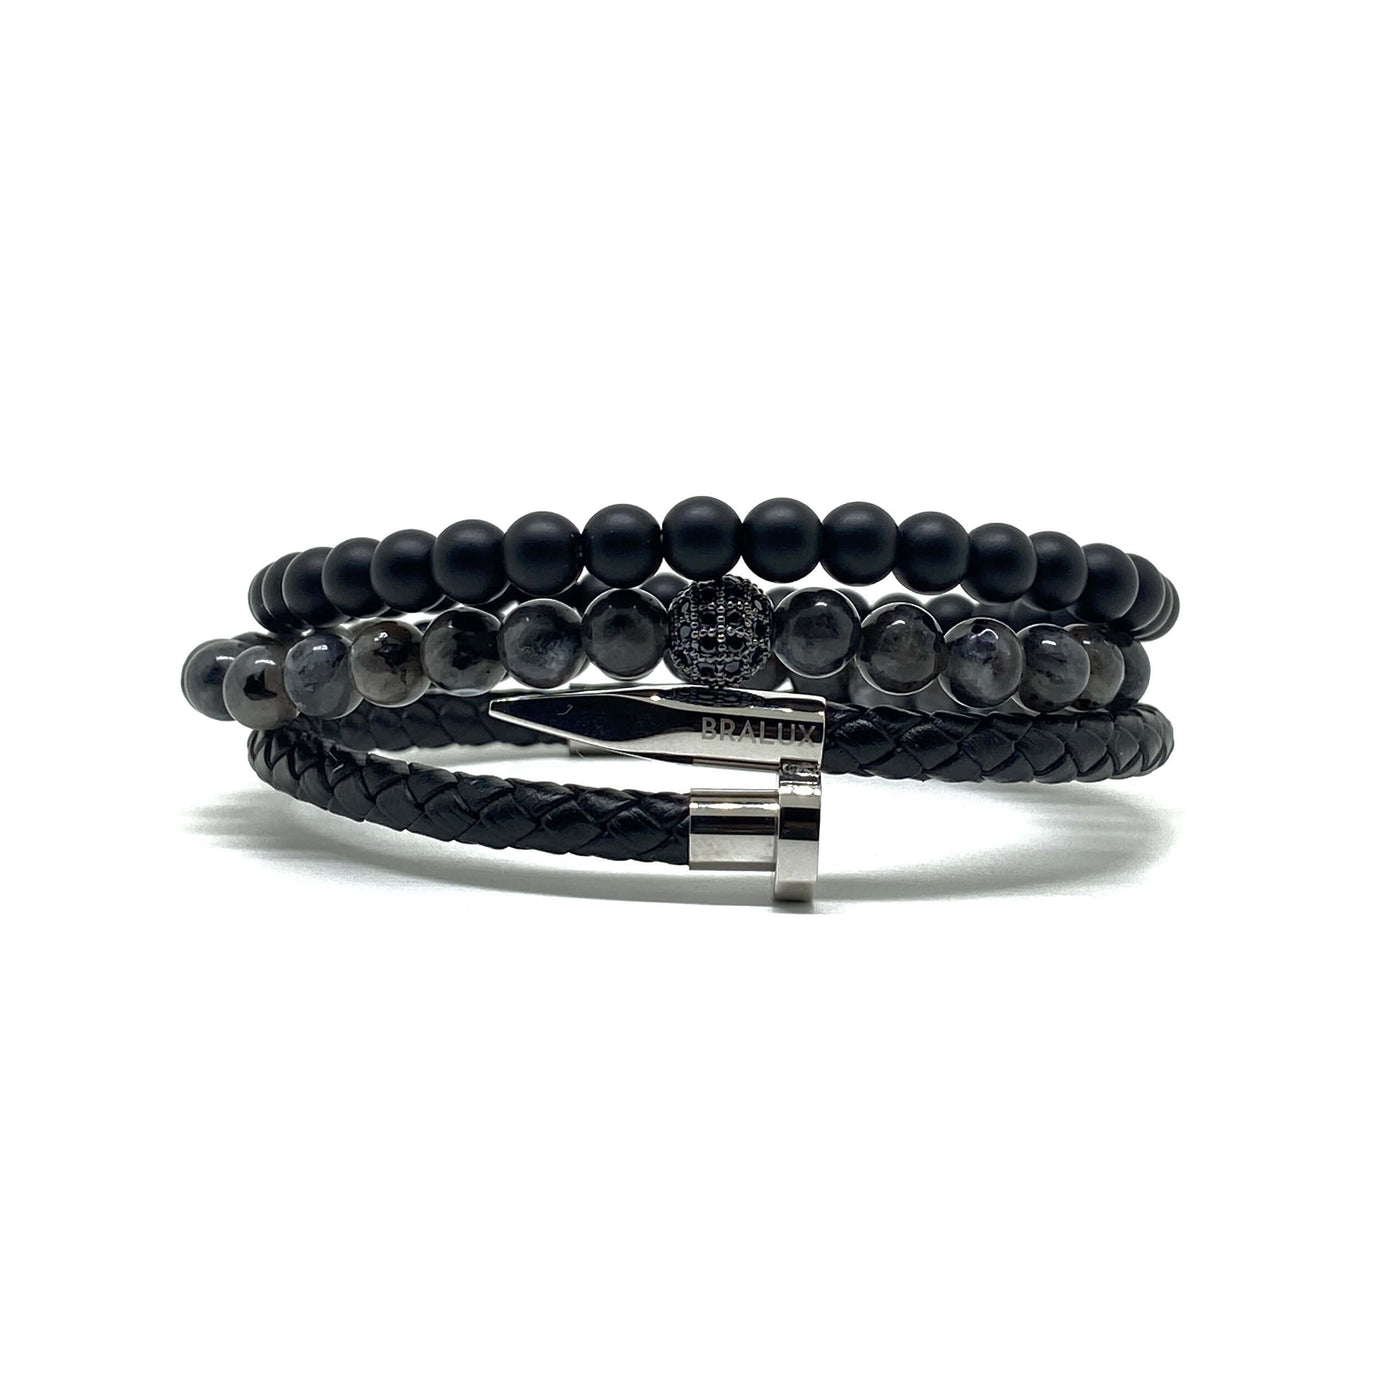 The Nail Leather Stack